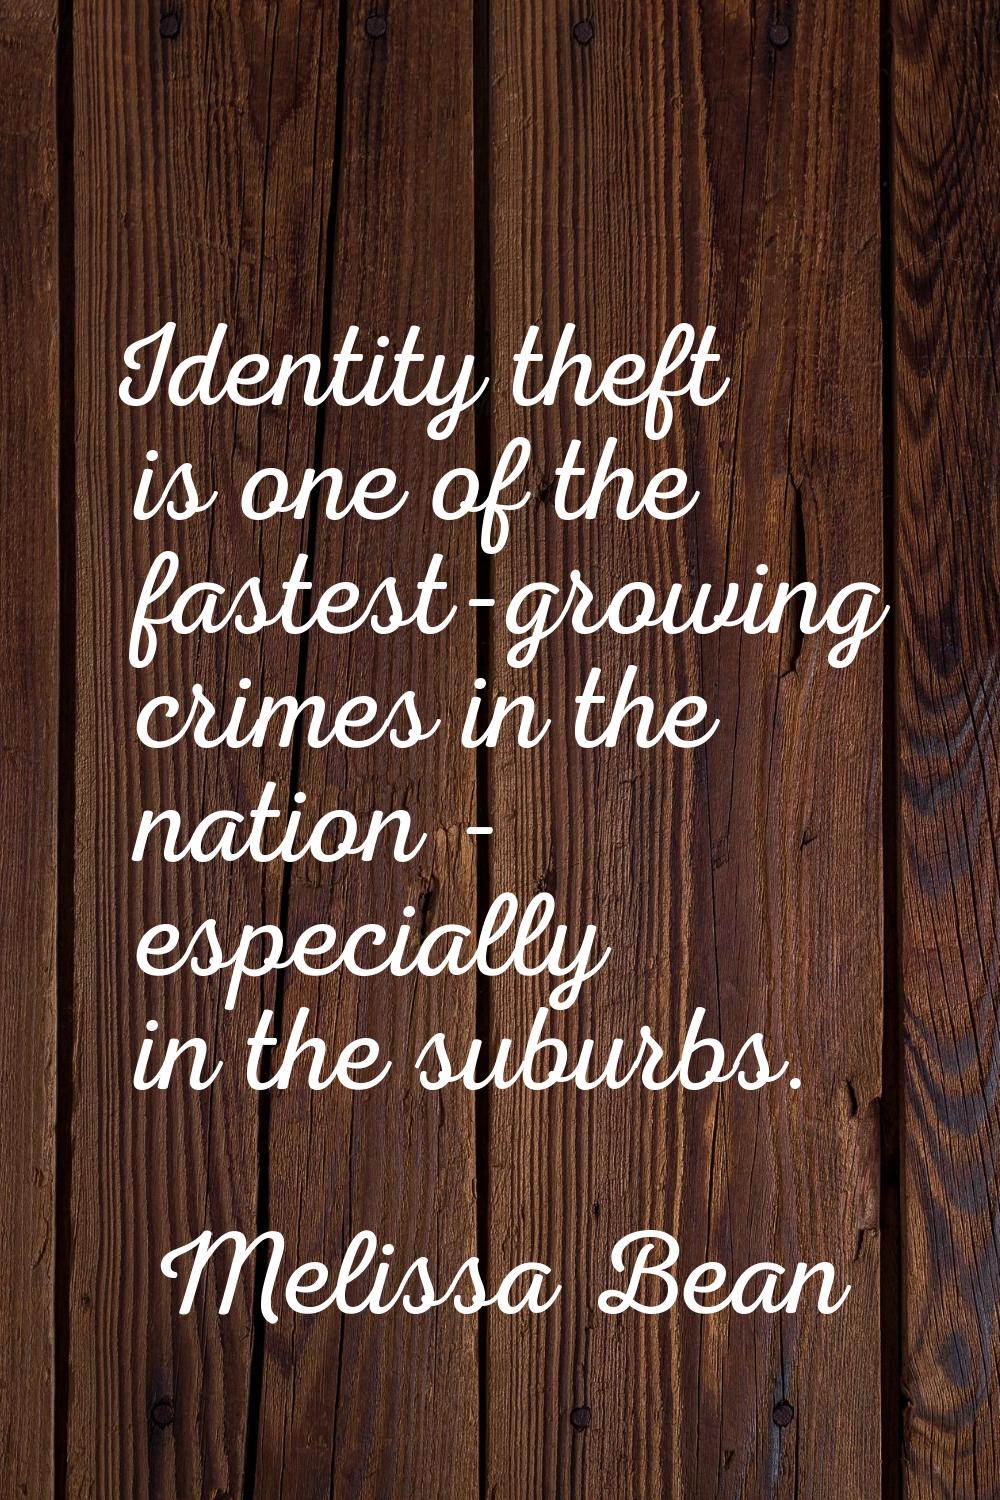 Identity theft is one of the fastest-growing crimes in the nation - especially in the suburbs.